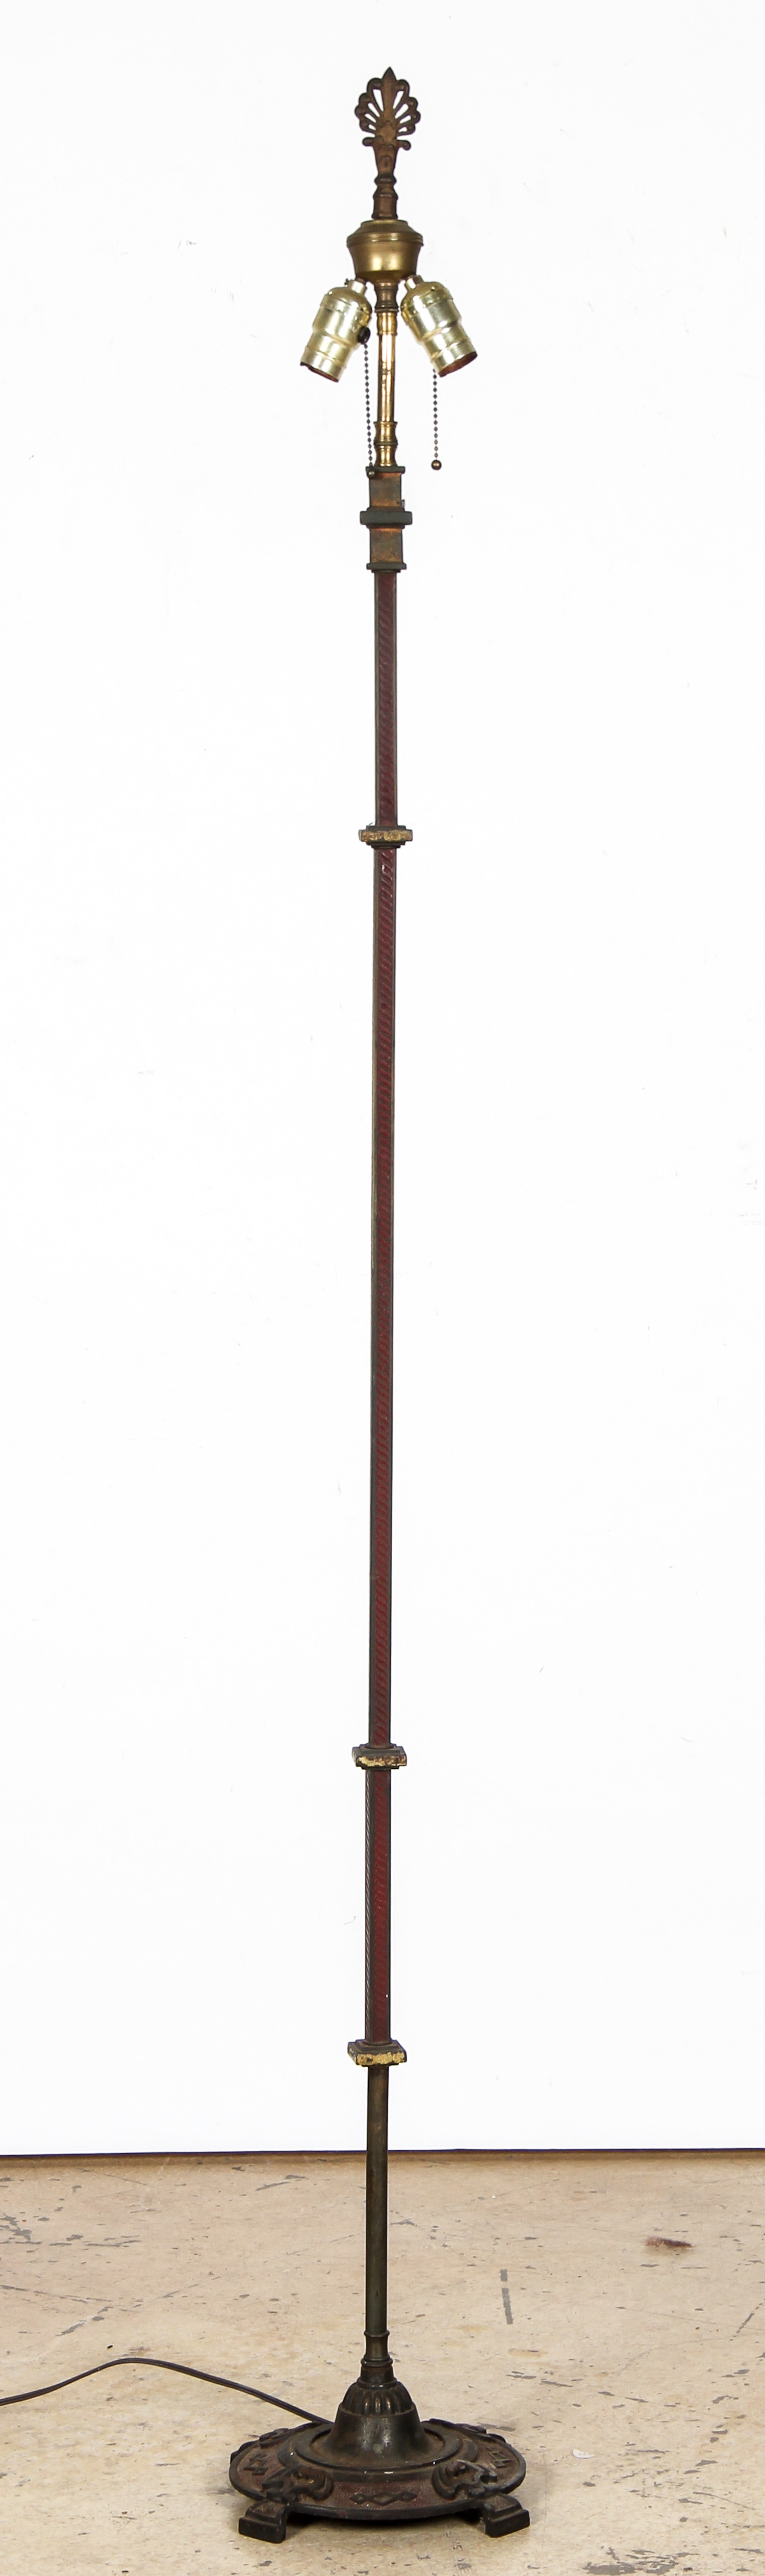 Arts And Crafts Style Cast Iron Torchiere. Stamped Rembrandt. Size: 69" x 14" x 14", 175 x 36 x 36